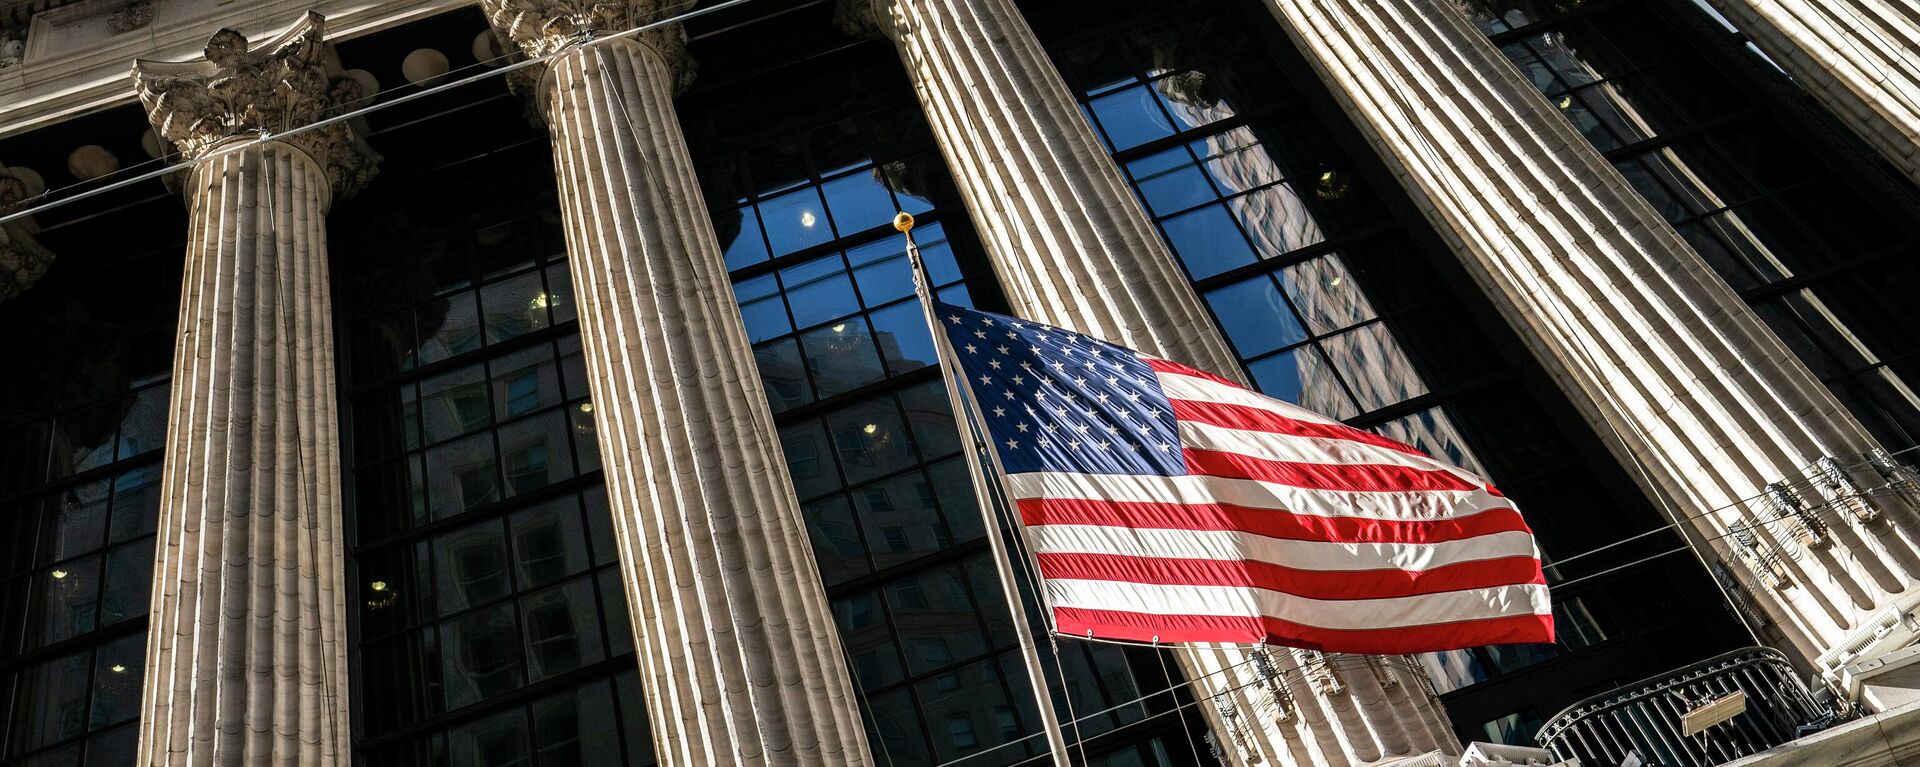 A U.S. flag waves outside the New York Stock Exchange, Monday, Jan. 24, 2022, in New York. Stocks are drifting between small gains and losses in the early going on Wall Street Tuesday, May 3, 2022 as investors await Wednesday's decision by the Federal Reserve on interest rates. The Fed is expected to raise its benchmark rate by twice the usual amount this week as it steps up its fight against inflation, which is at a four-decade high. - Sputnik International, 1920, 30.09.2022